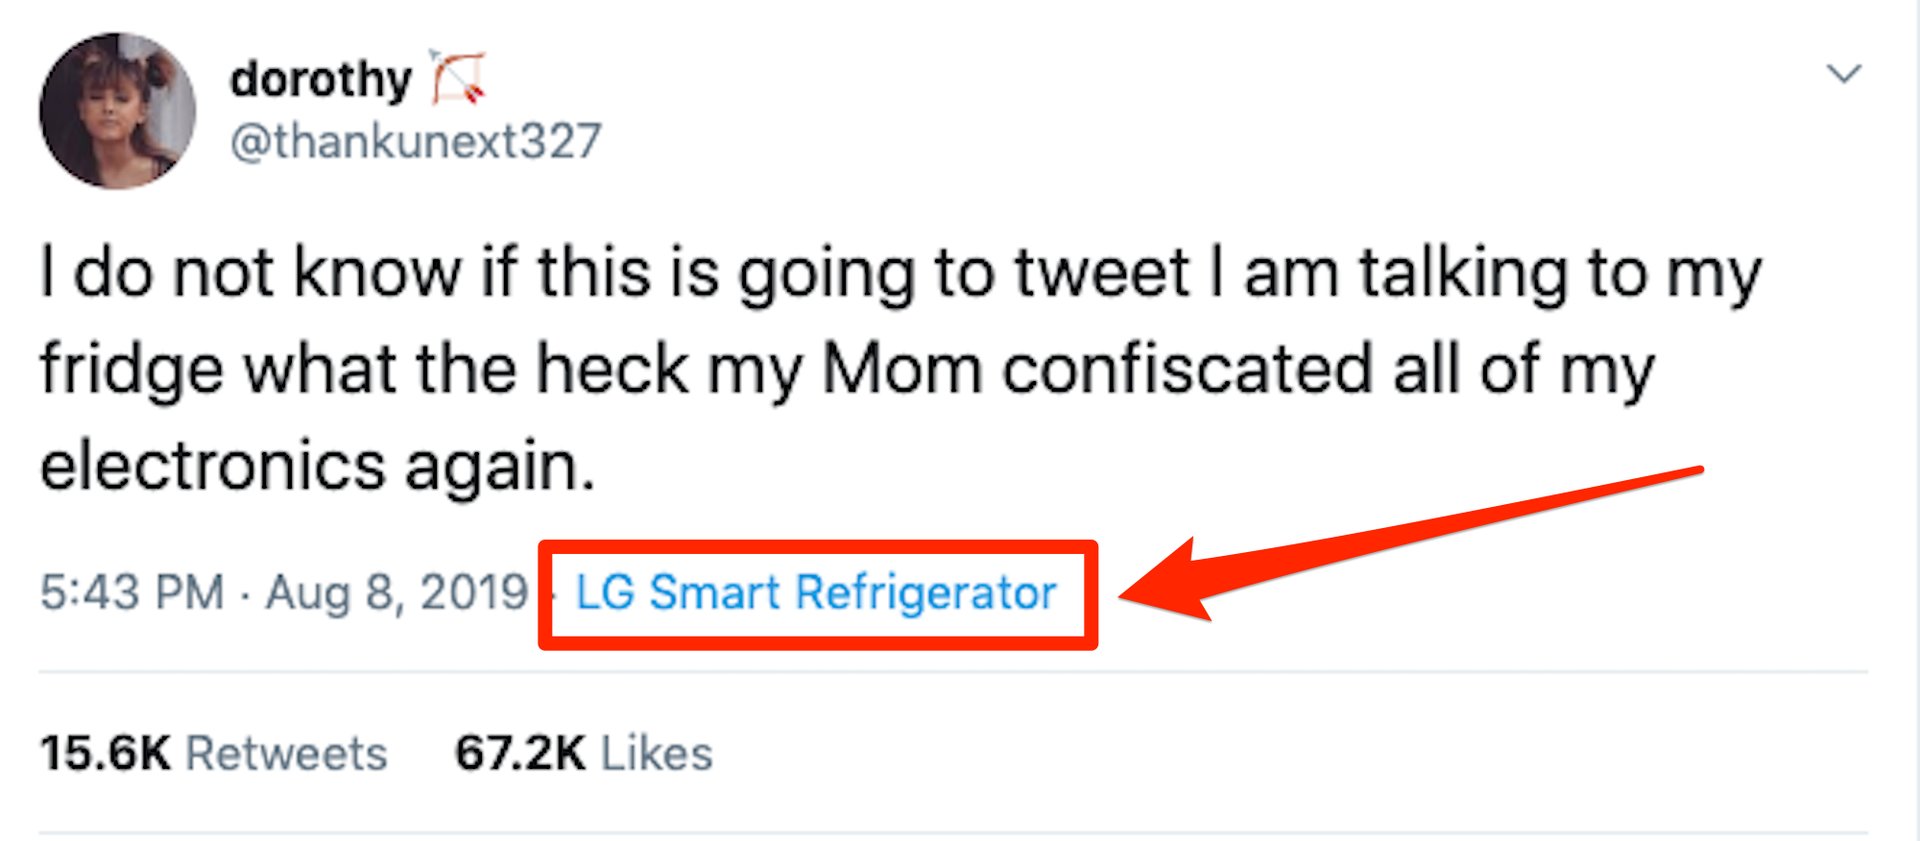 LG Smart Fridge Was Used To Tweet Giving Rise To #FreeDorothy